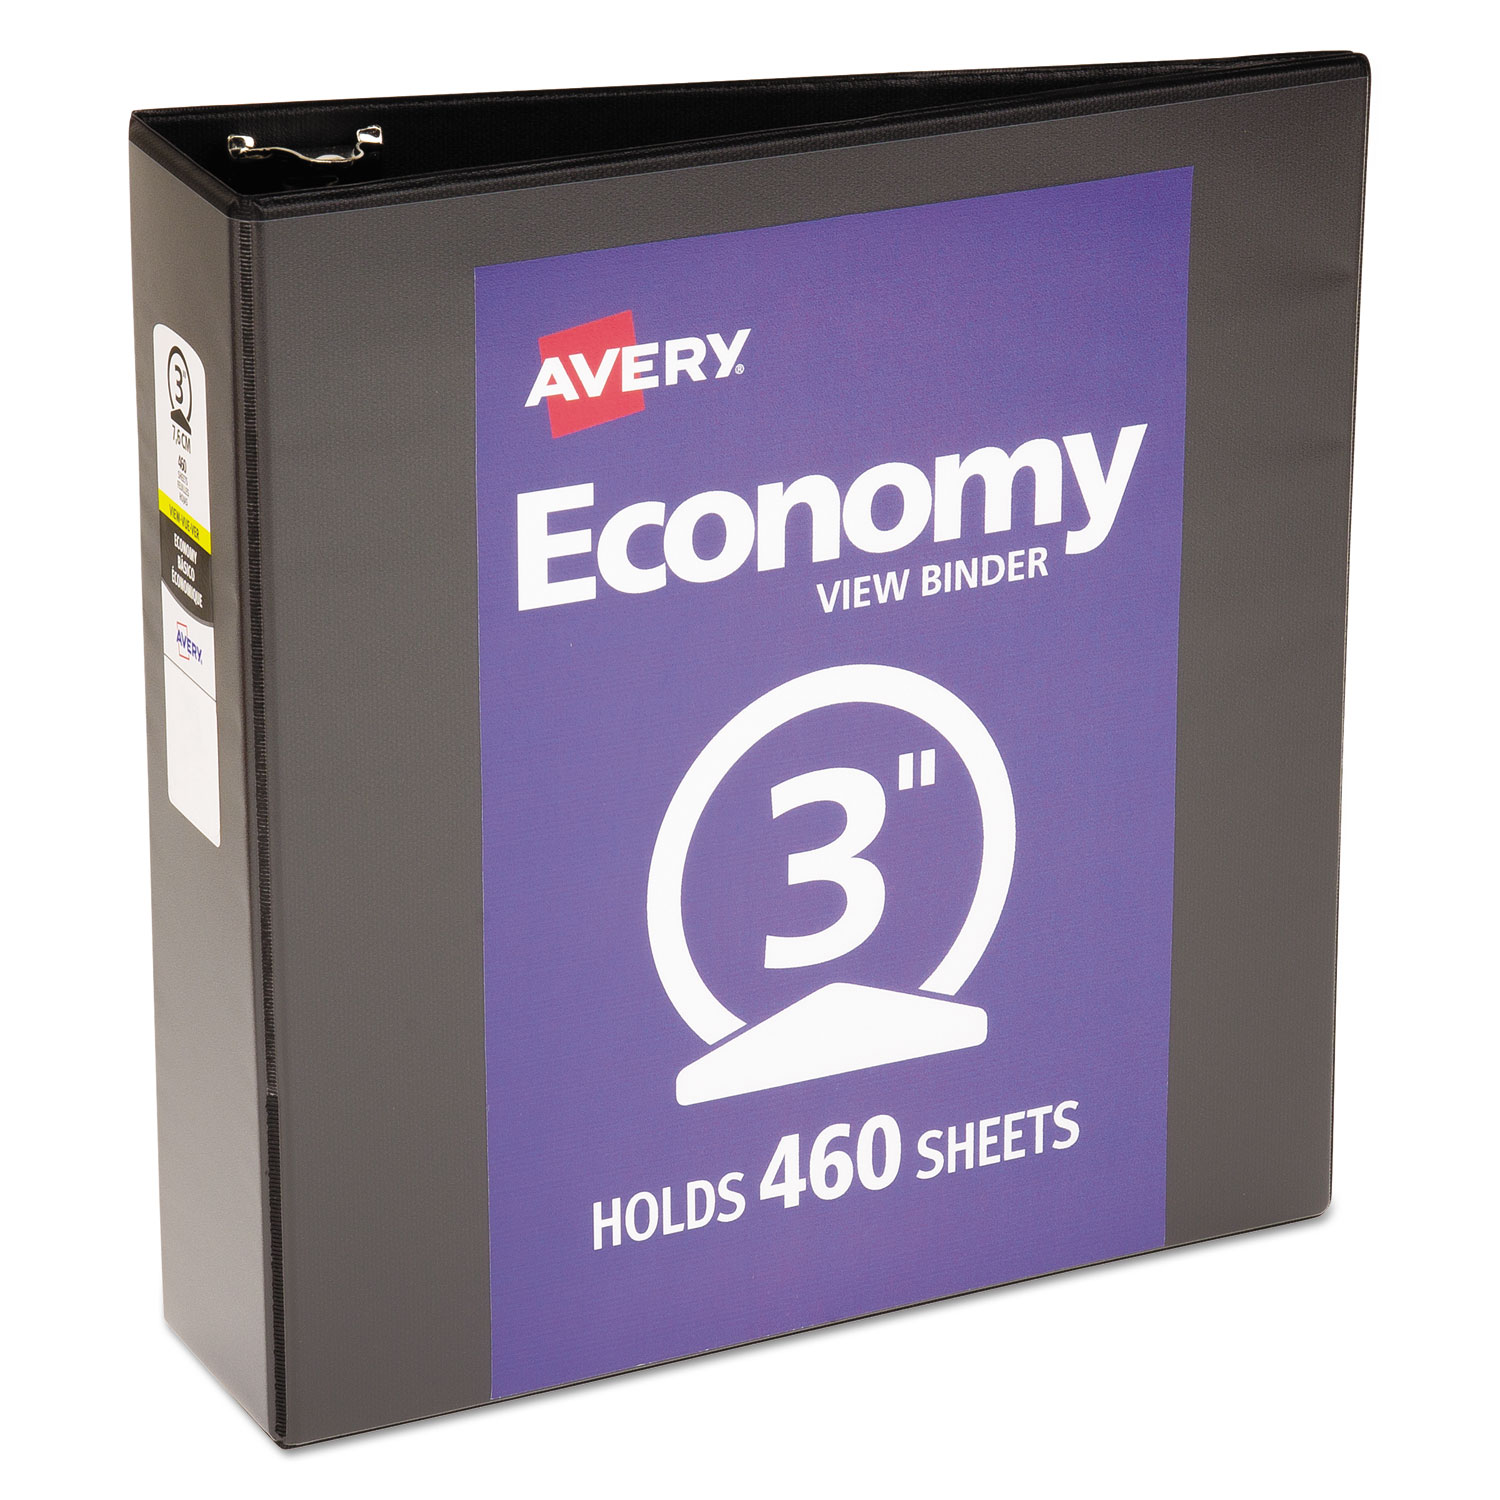  Avery 05740 Economy View Binder with Round Rings , 3 Rings, 3 Capacity, 11 x 8.5, Black (AVE05740) 